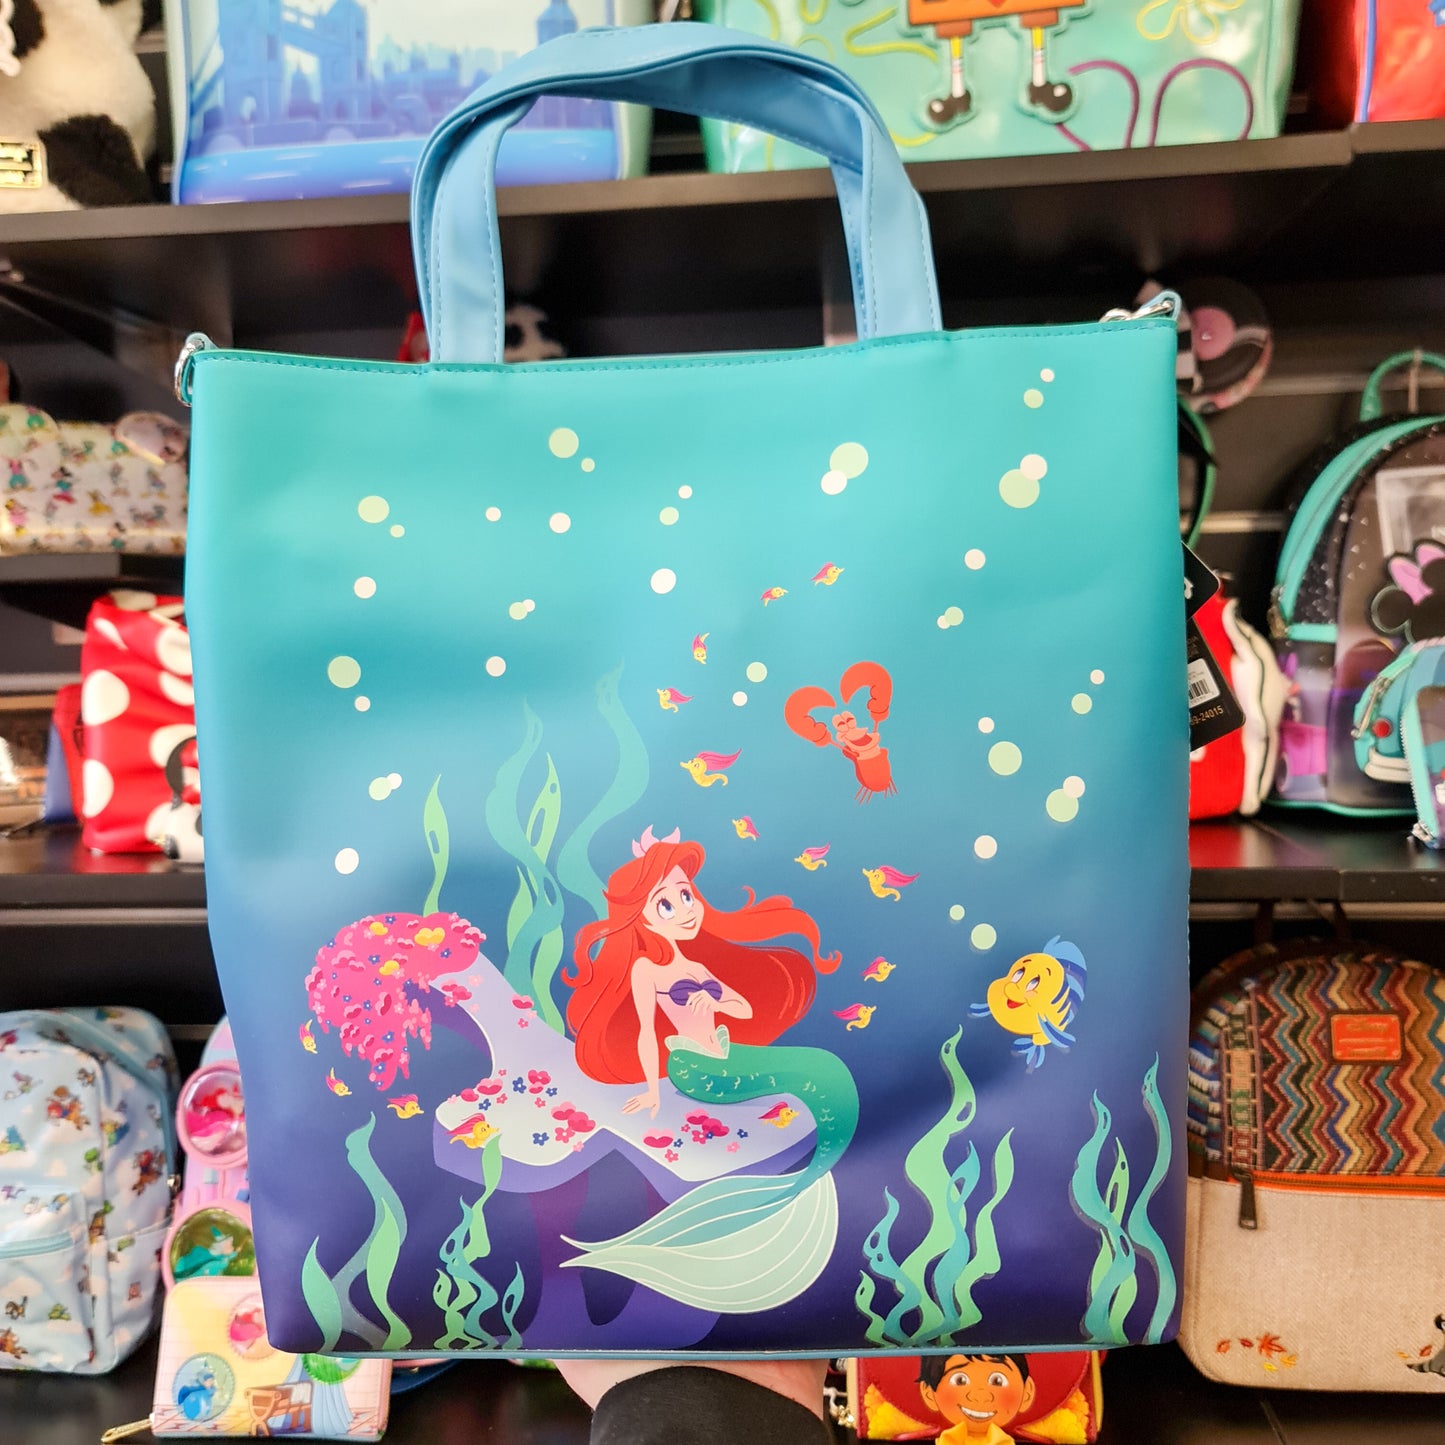 DISNEY TLM 35TH ANNIVERSARY LIFE IS THE BUBBLES PU TOTE BAG